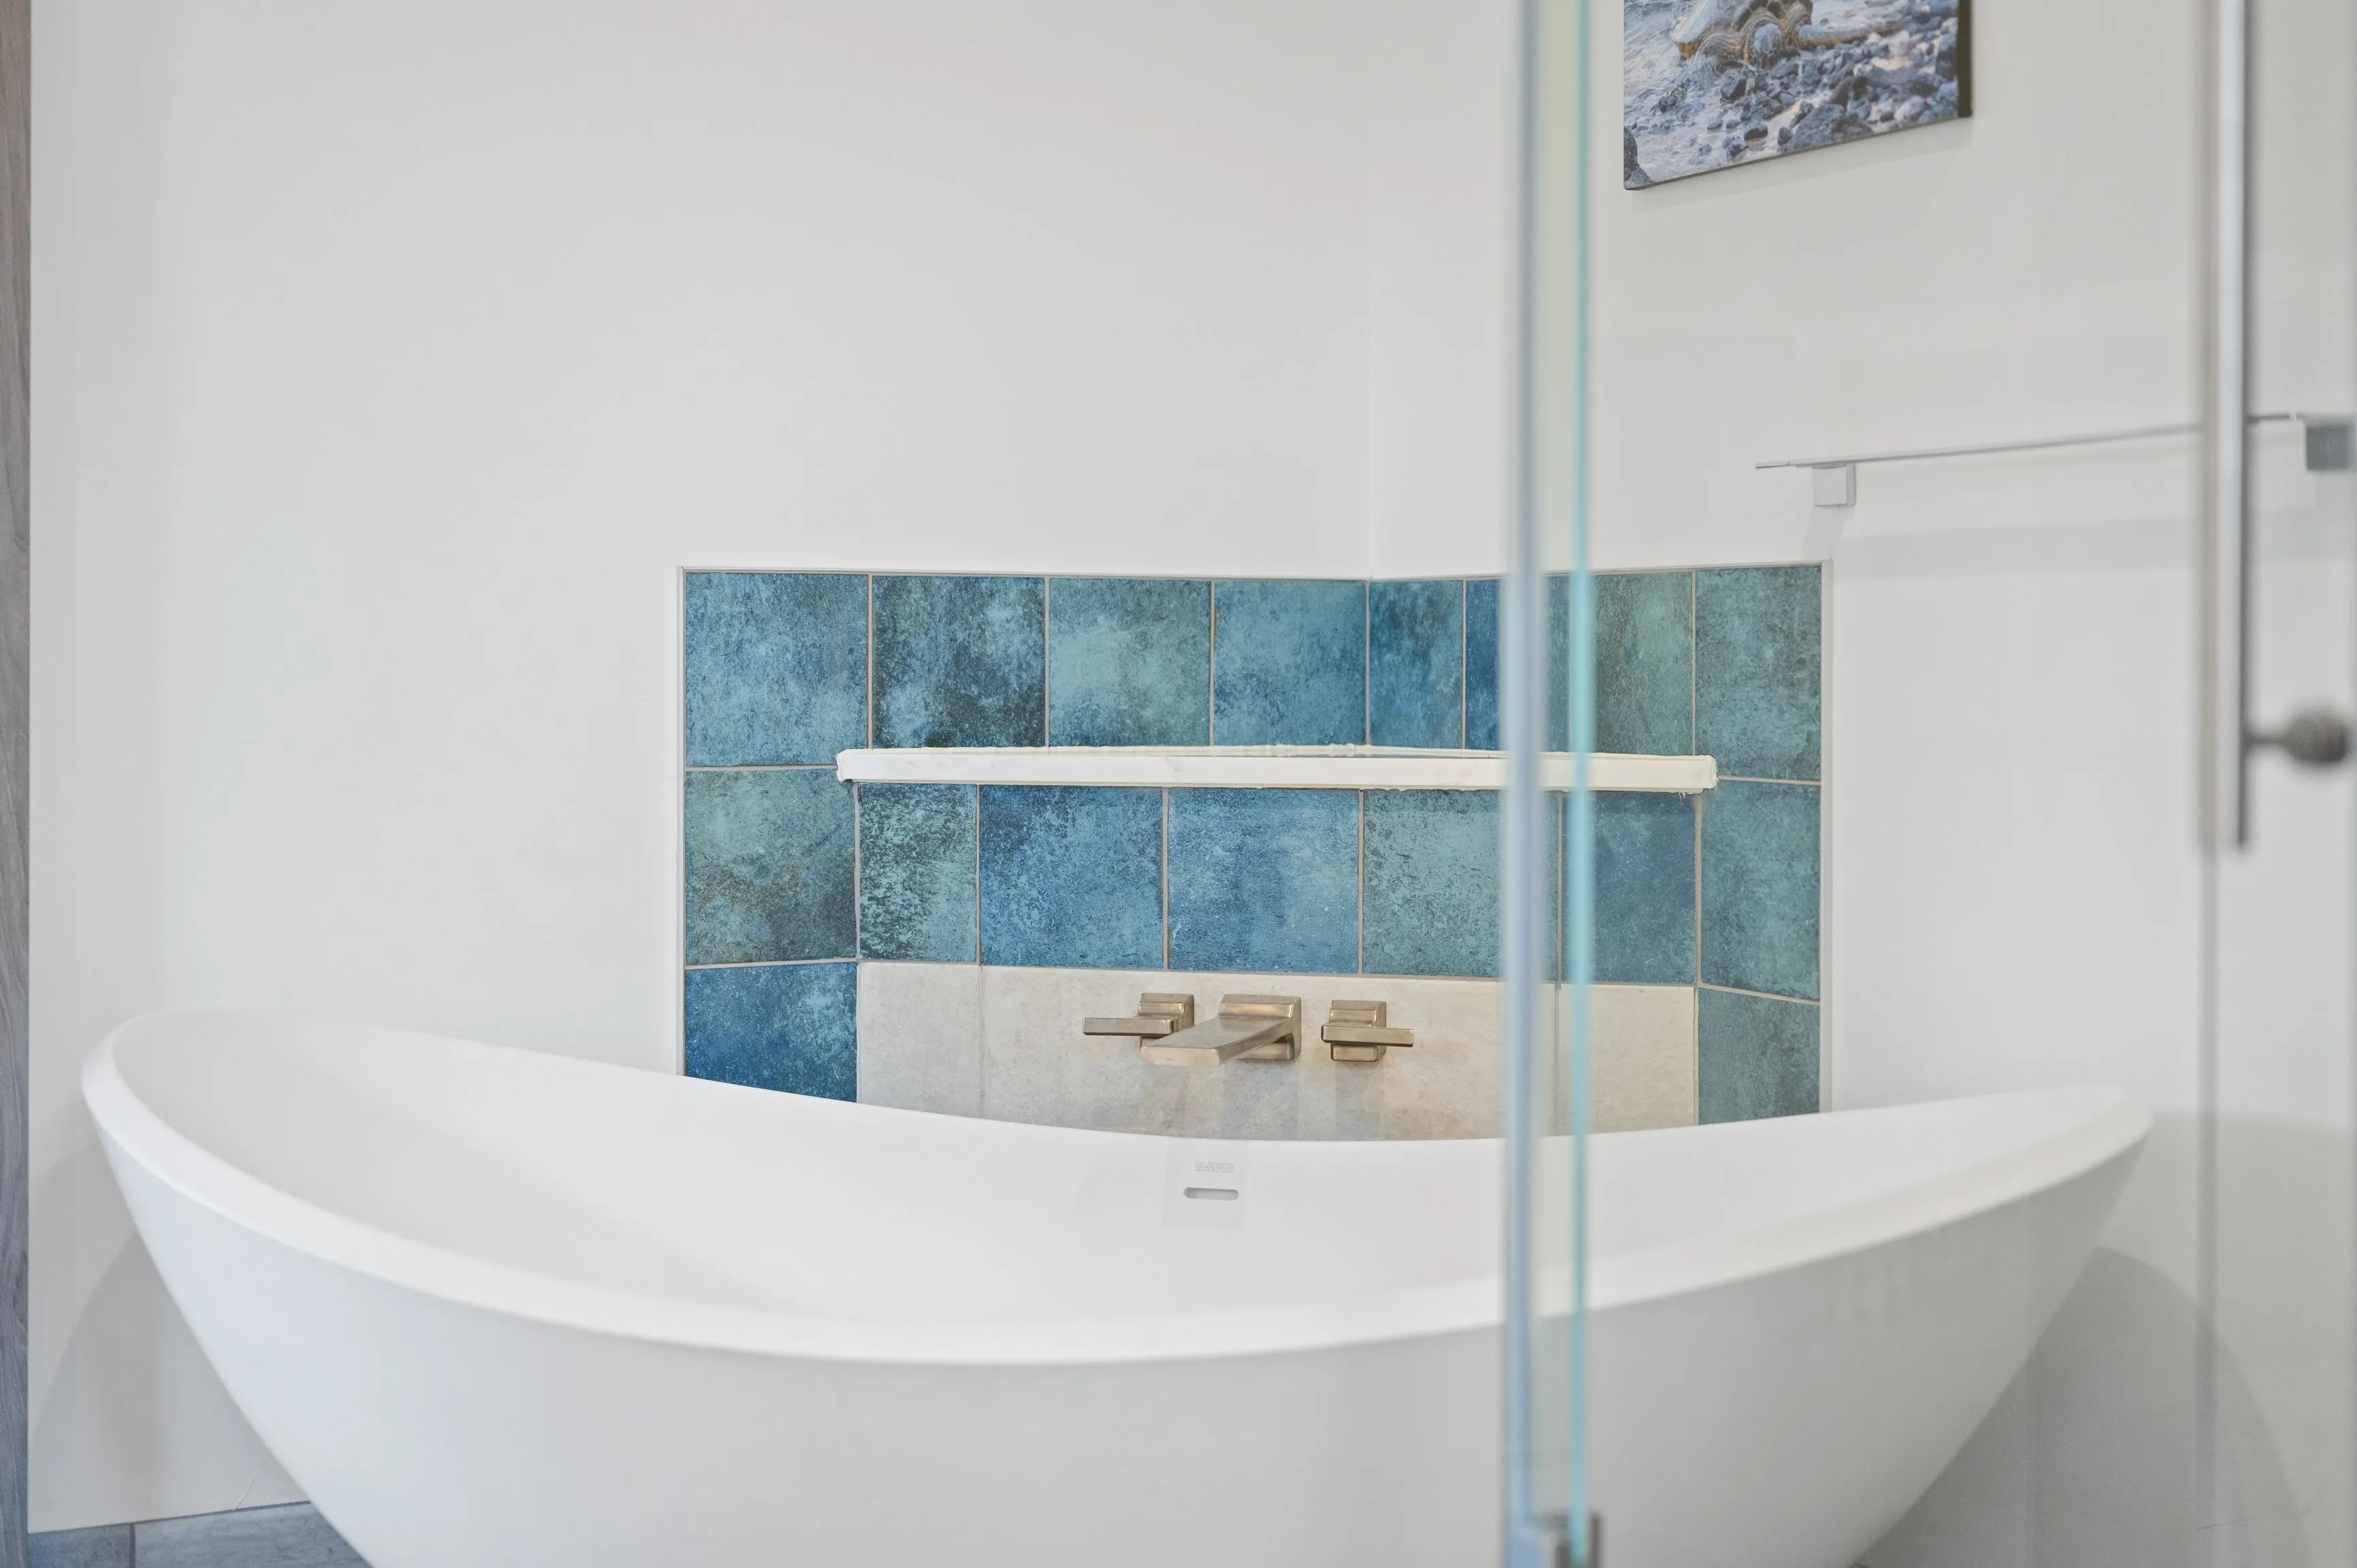 Modern bathroom interior with a white freestanding bathtub, blue and beige tiled wall, and a glass panel with a framed picture hanging on the wall.